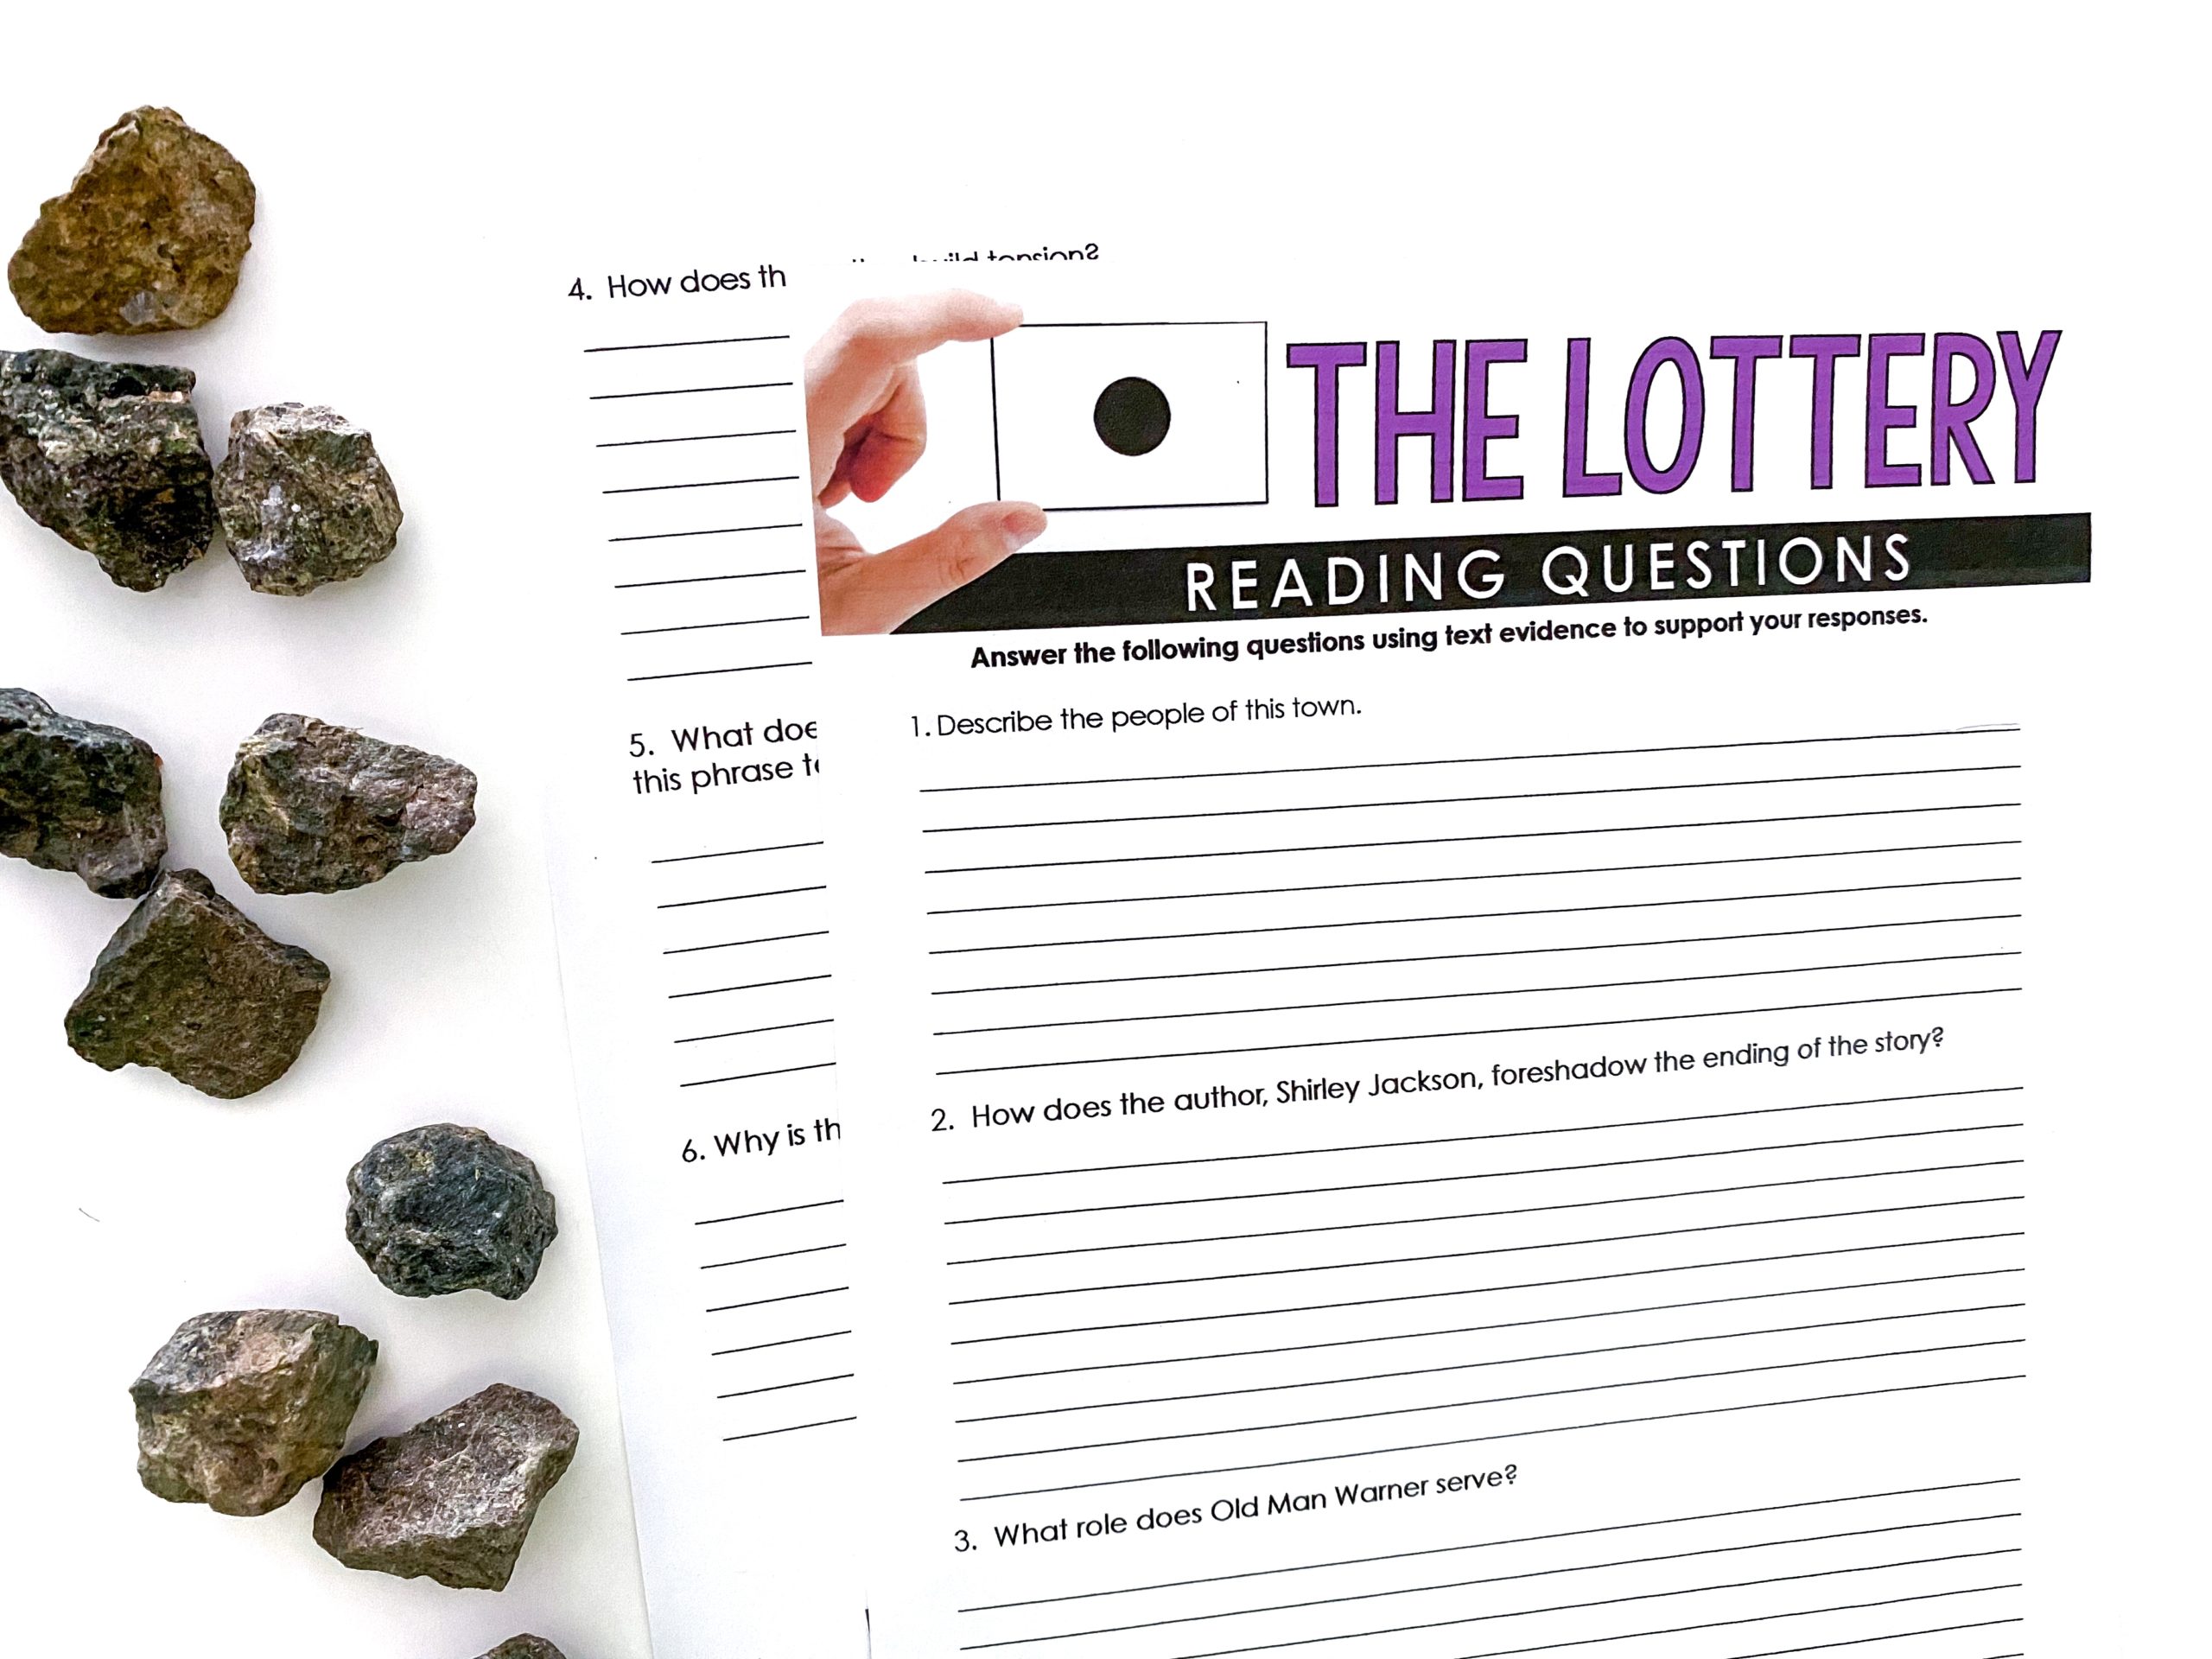 Reading Questions for The Lottery